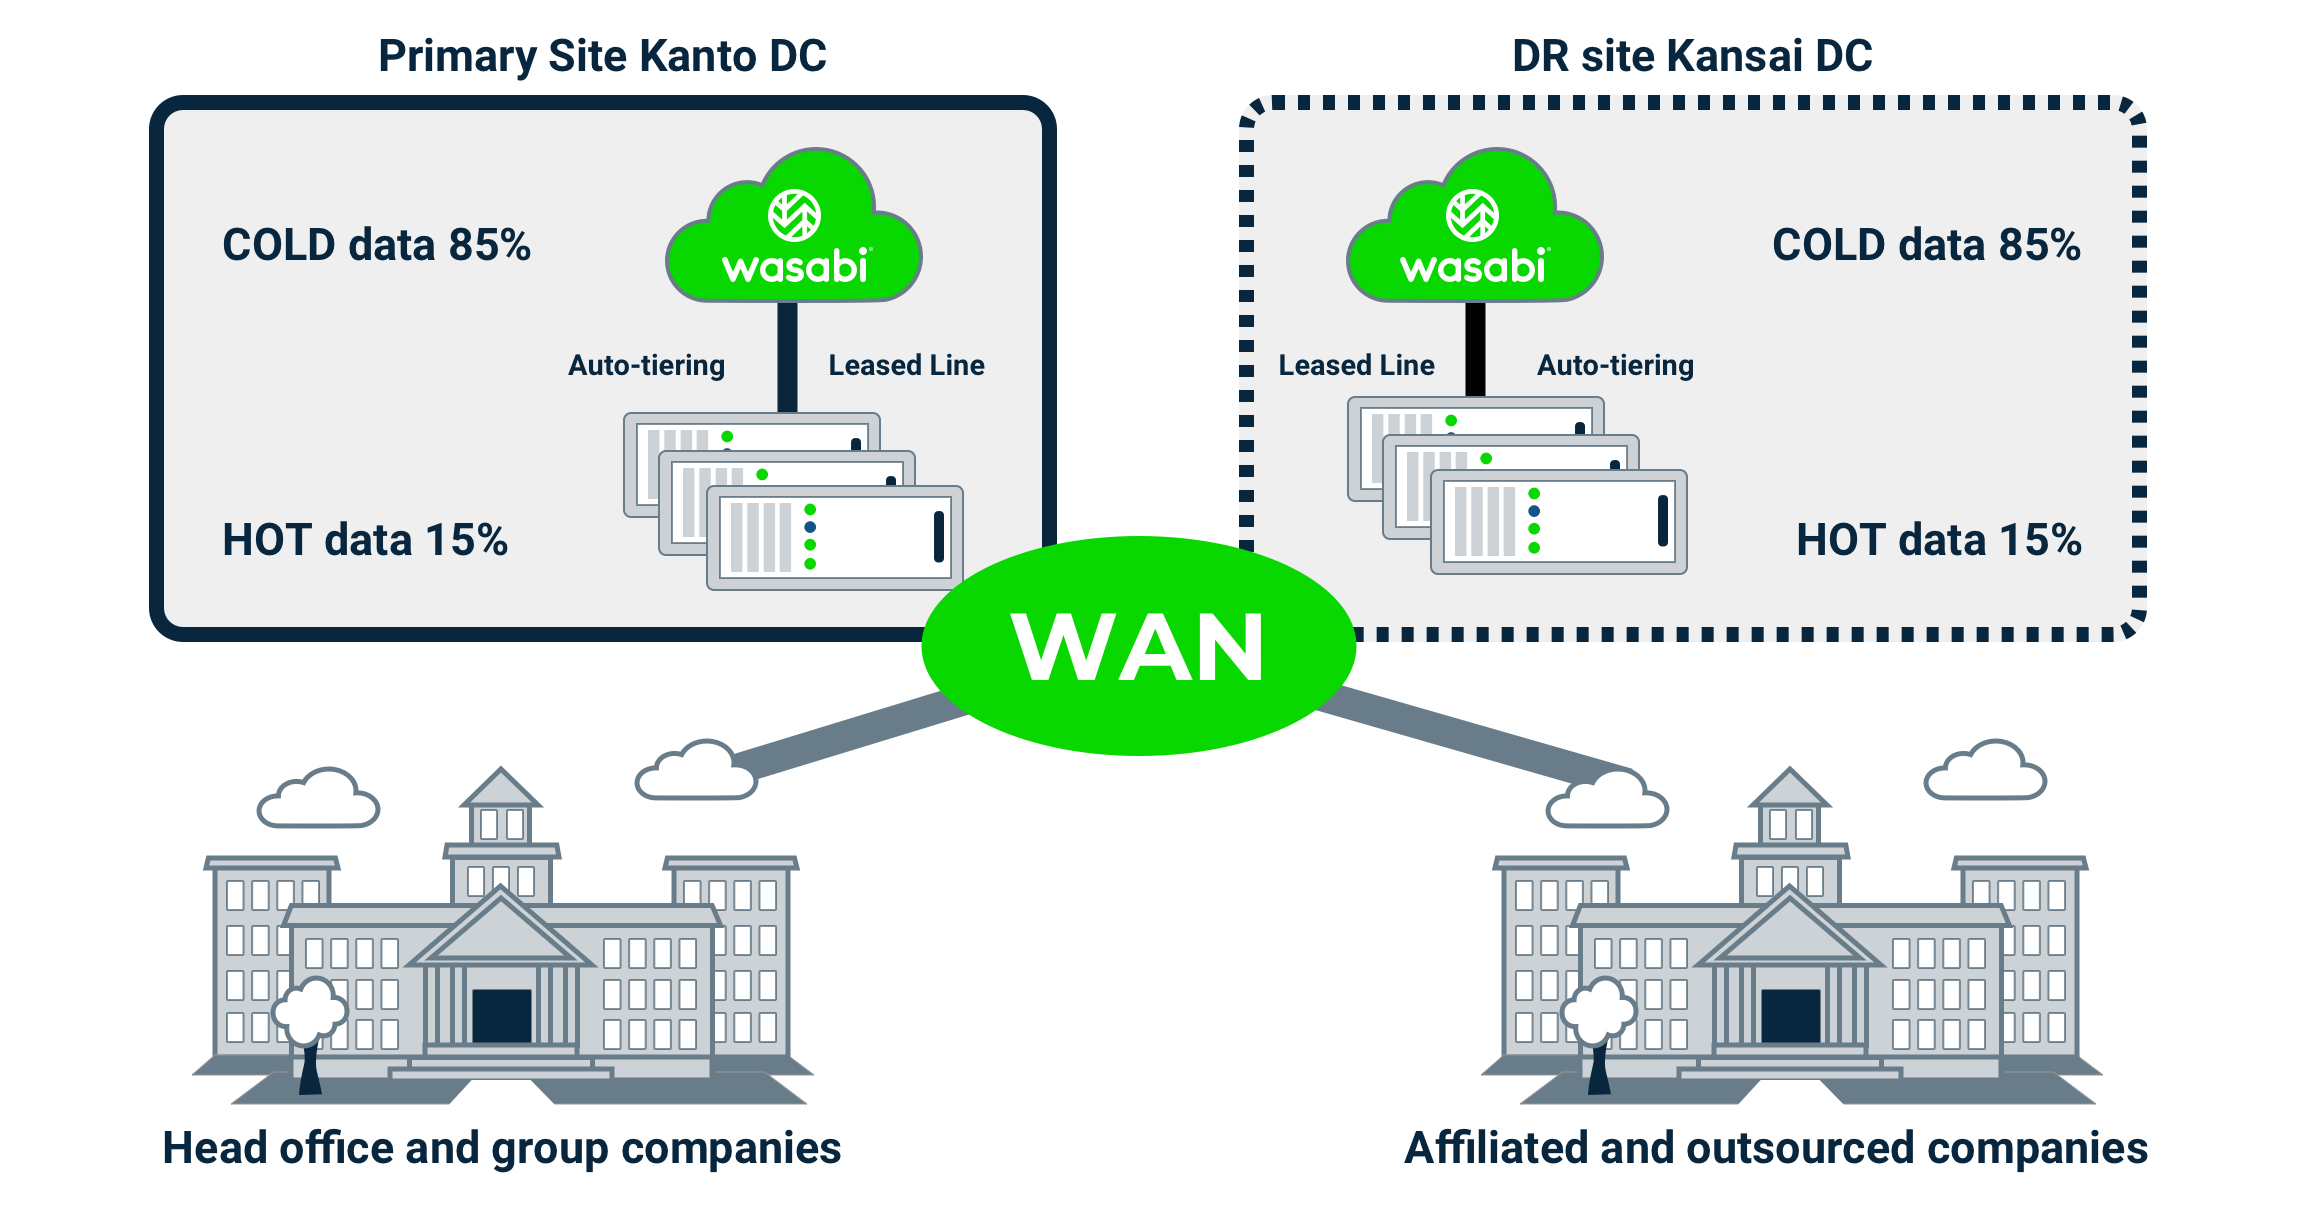 Diagram showing the way data is managed between Kanto and Kansai data centers using Wasabi